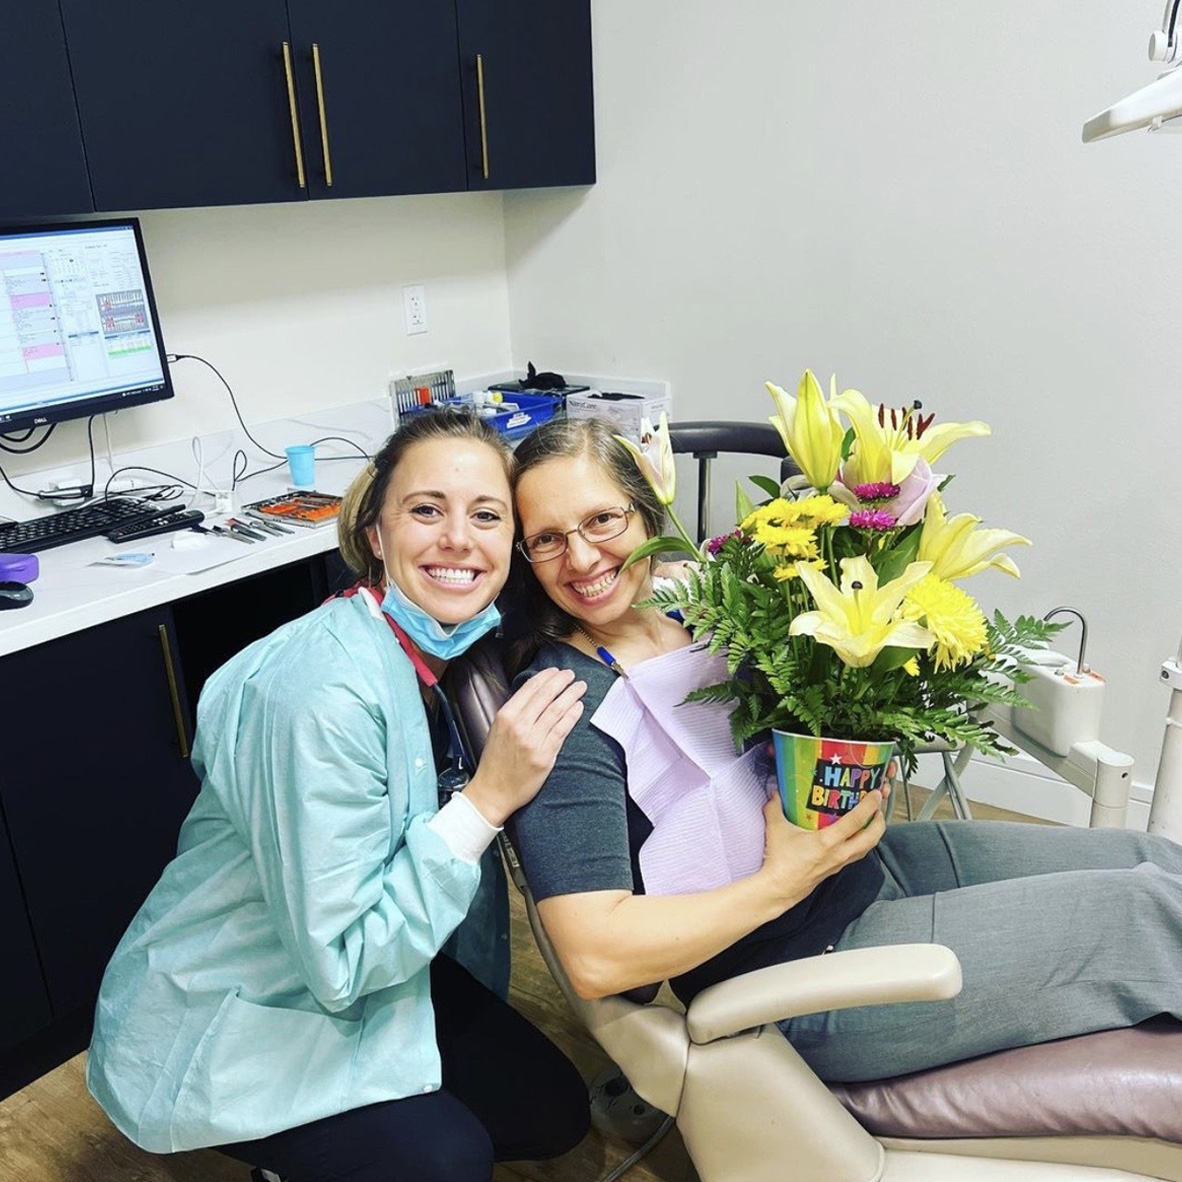 Dental team member giving dentistry patient a plant in Royal Palm Beach